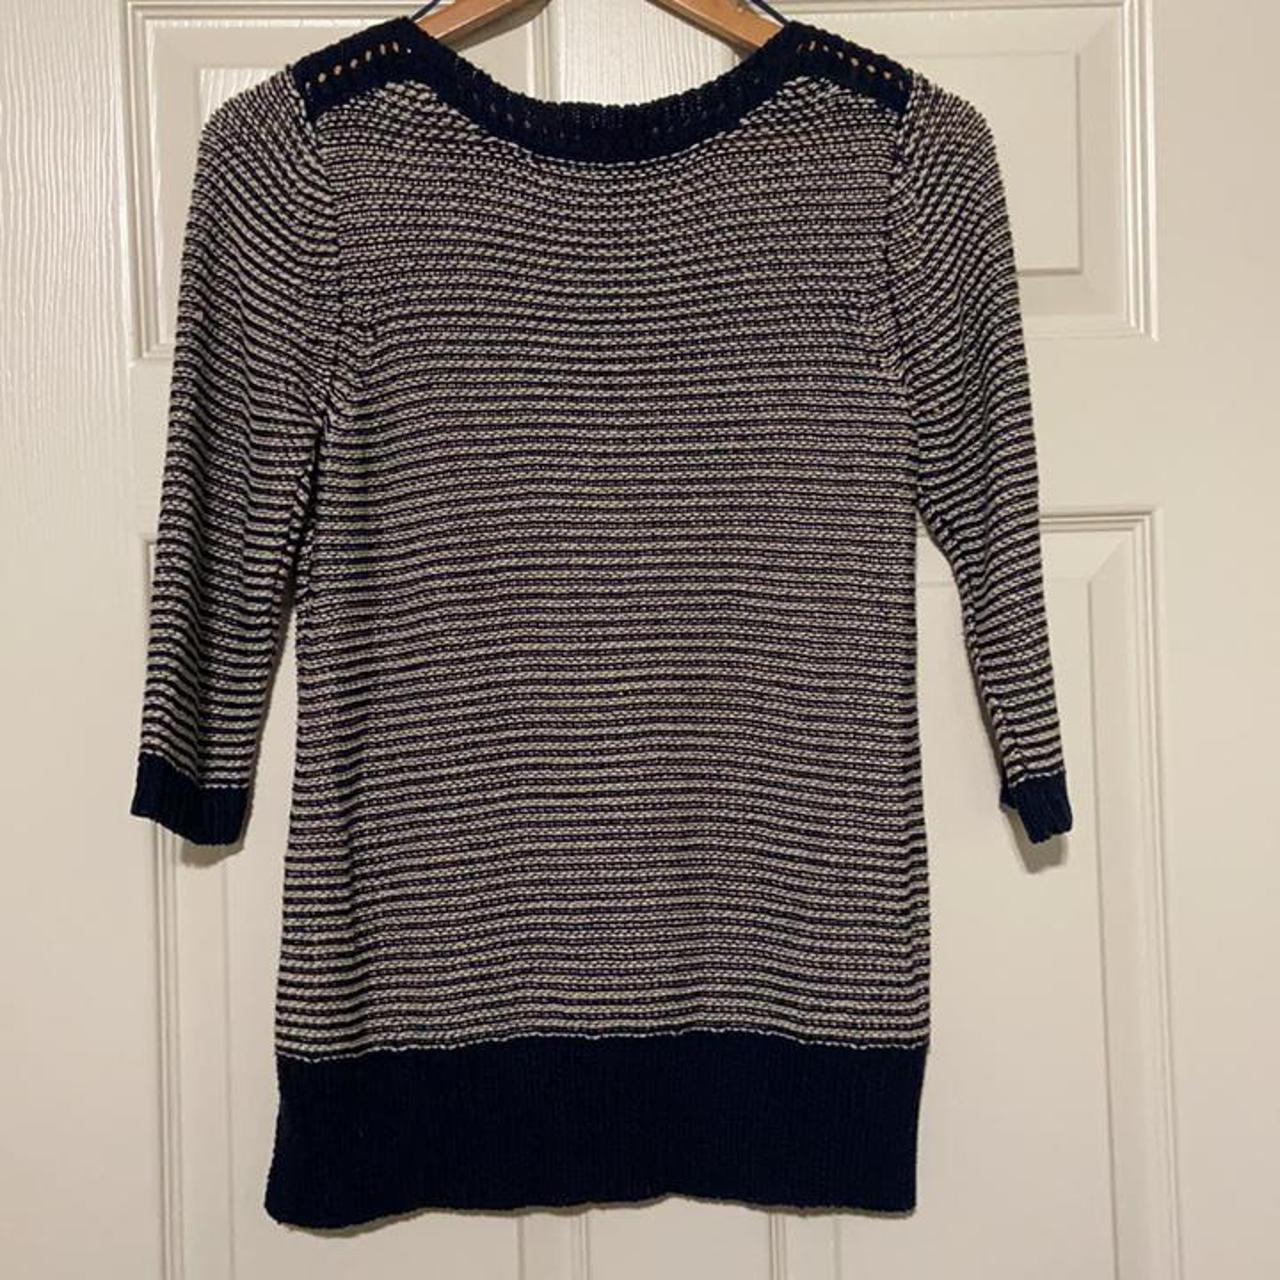 Product Image 2 - Phase Eight striped knit sweater.